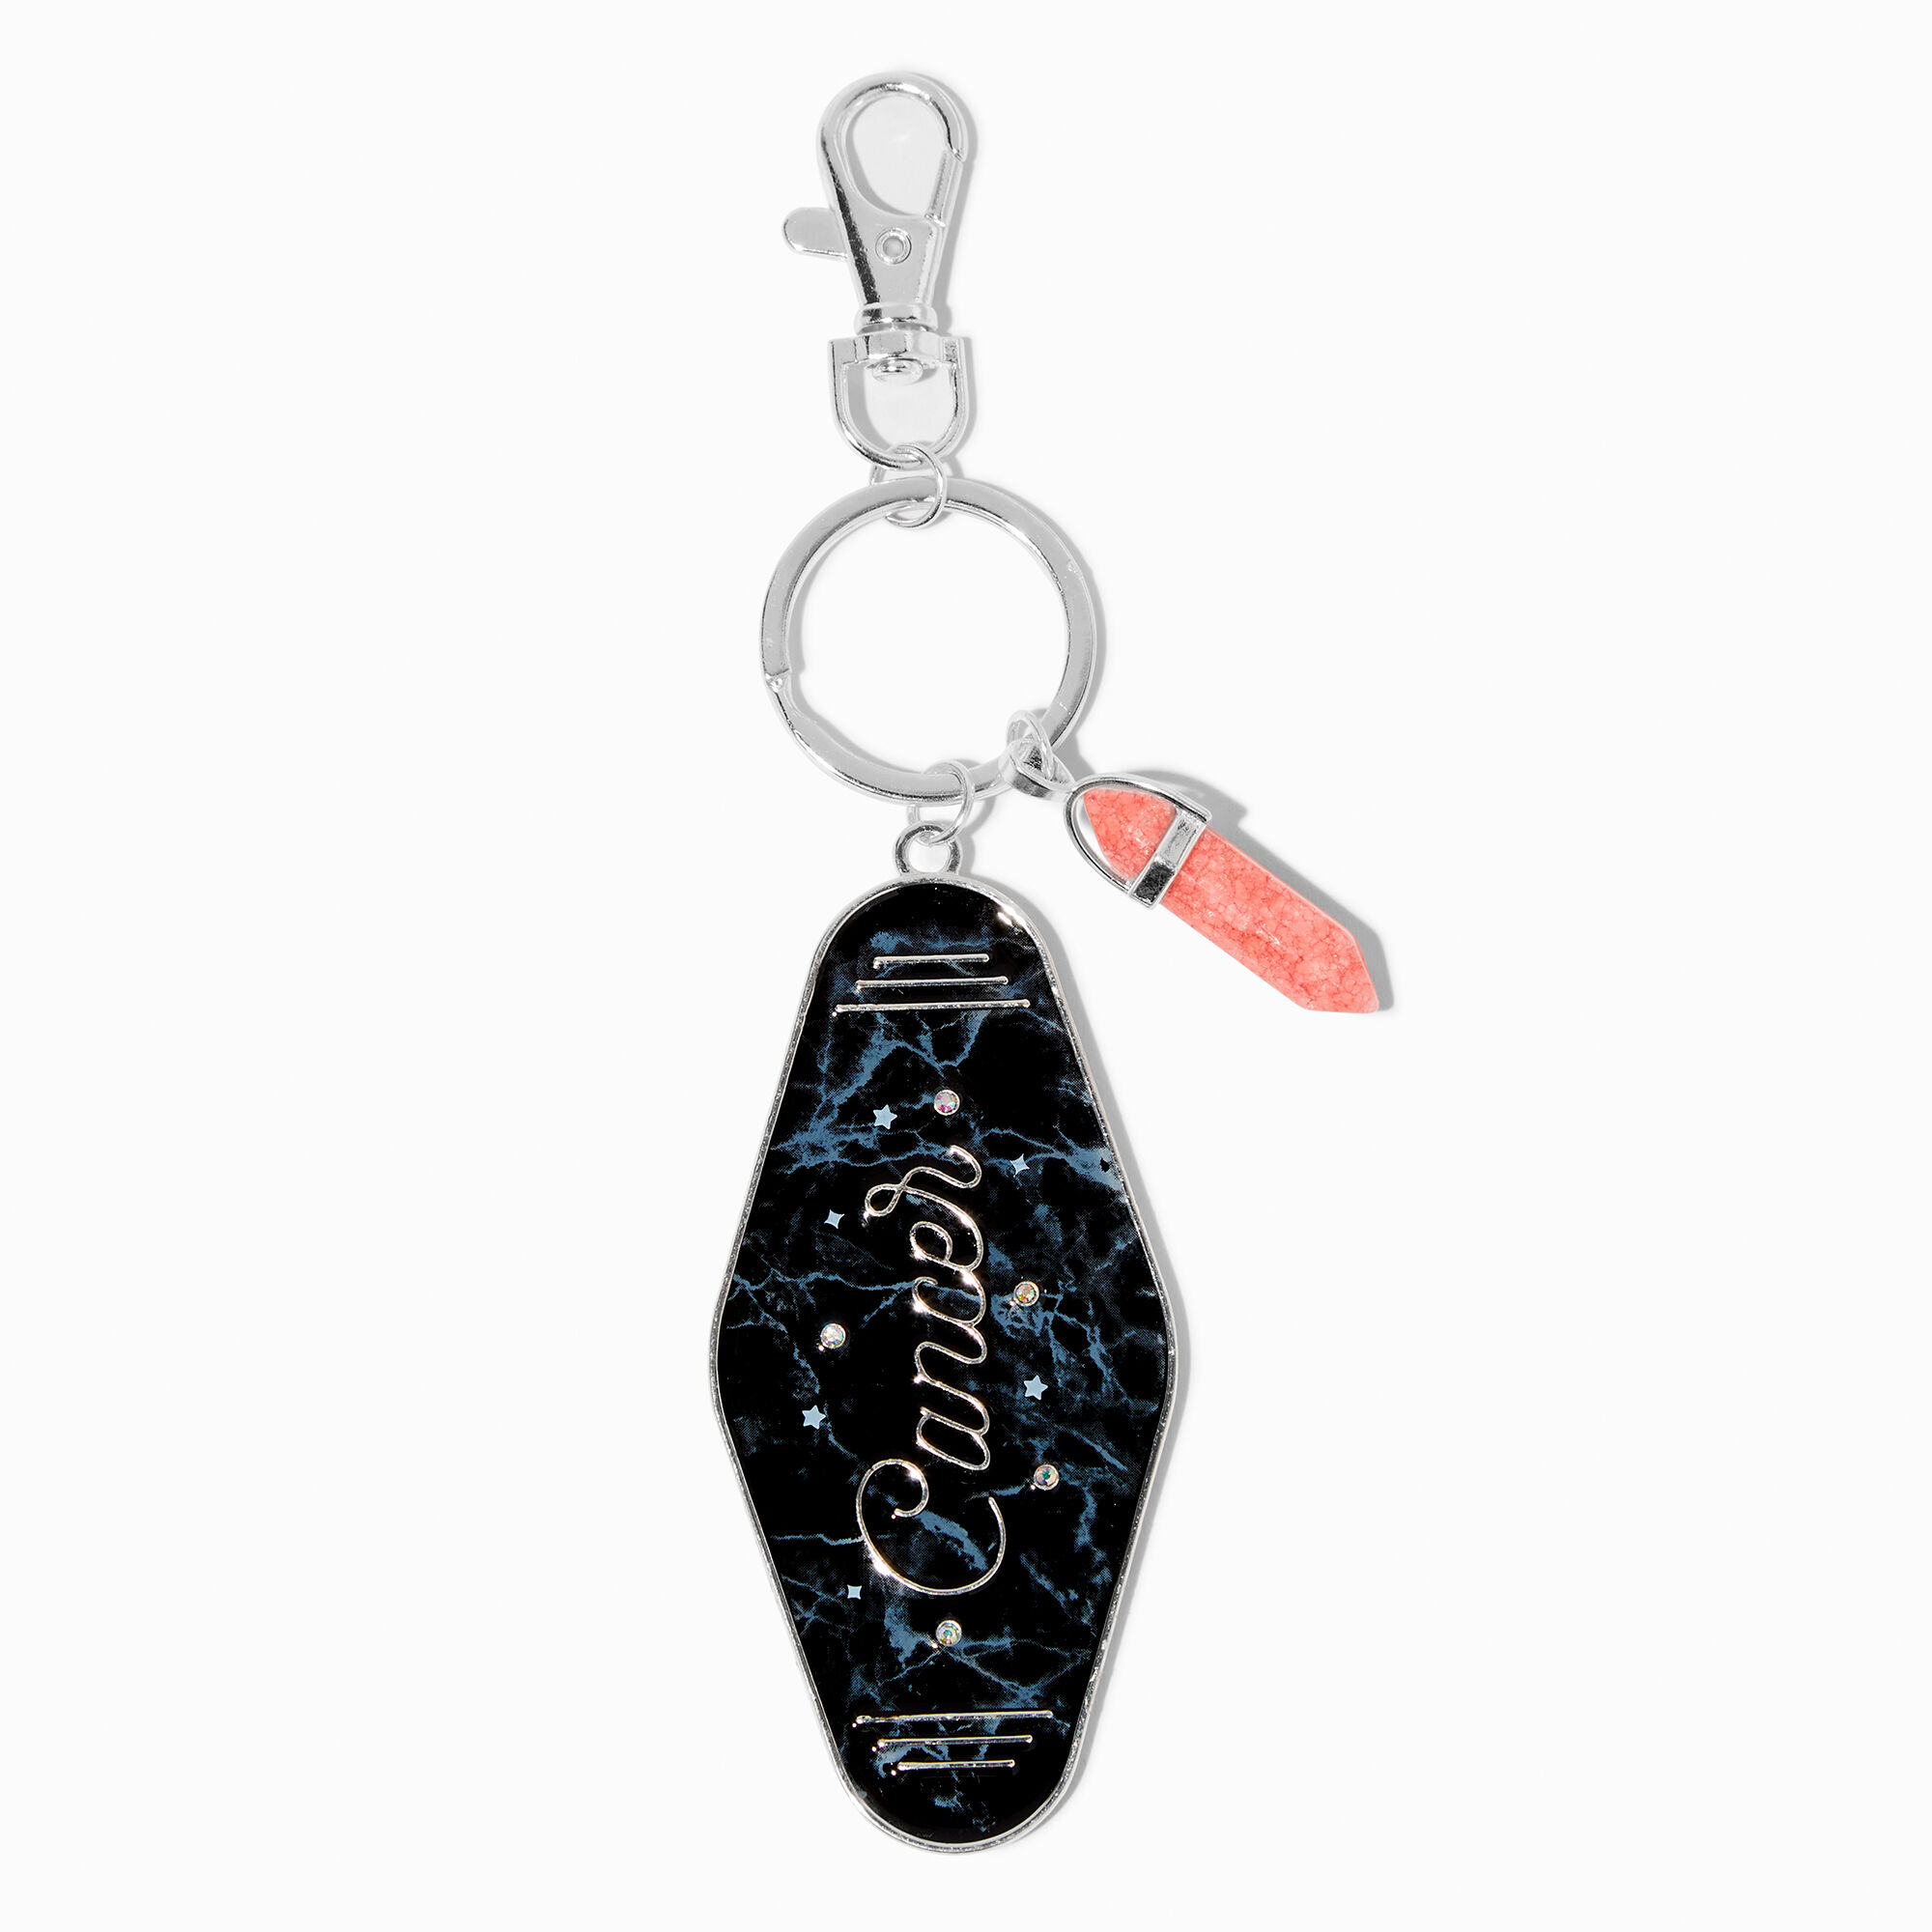 View Claires Retro Hotel Zodiac Keyring Cancer information